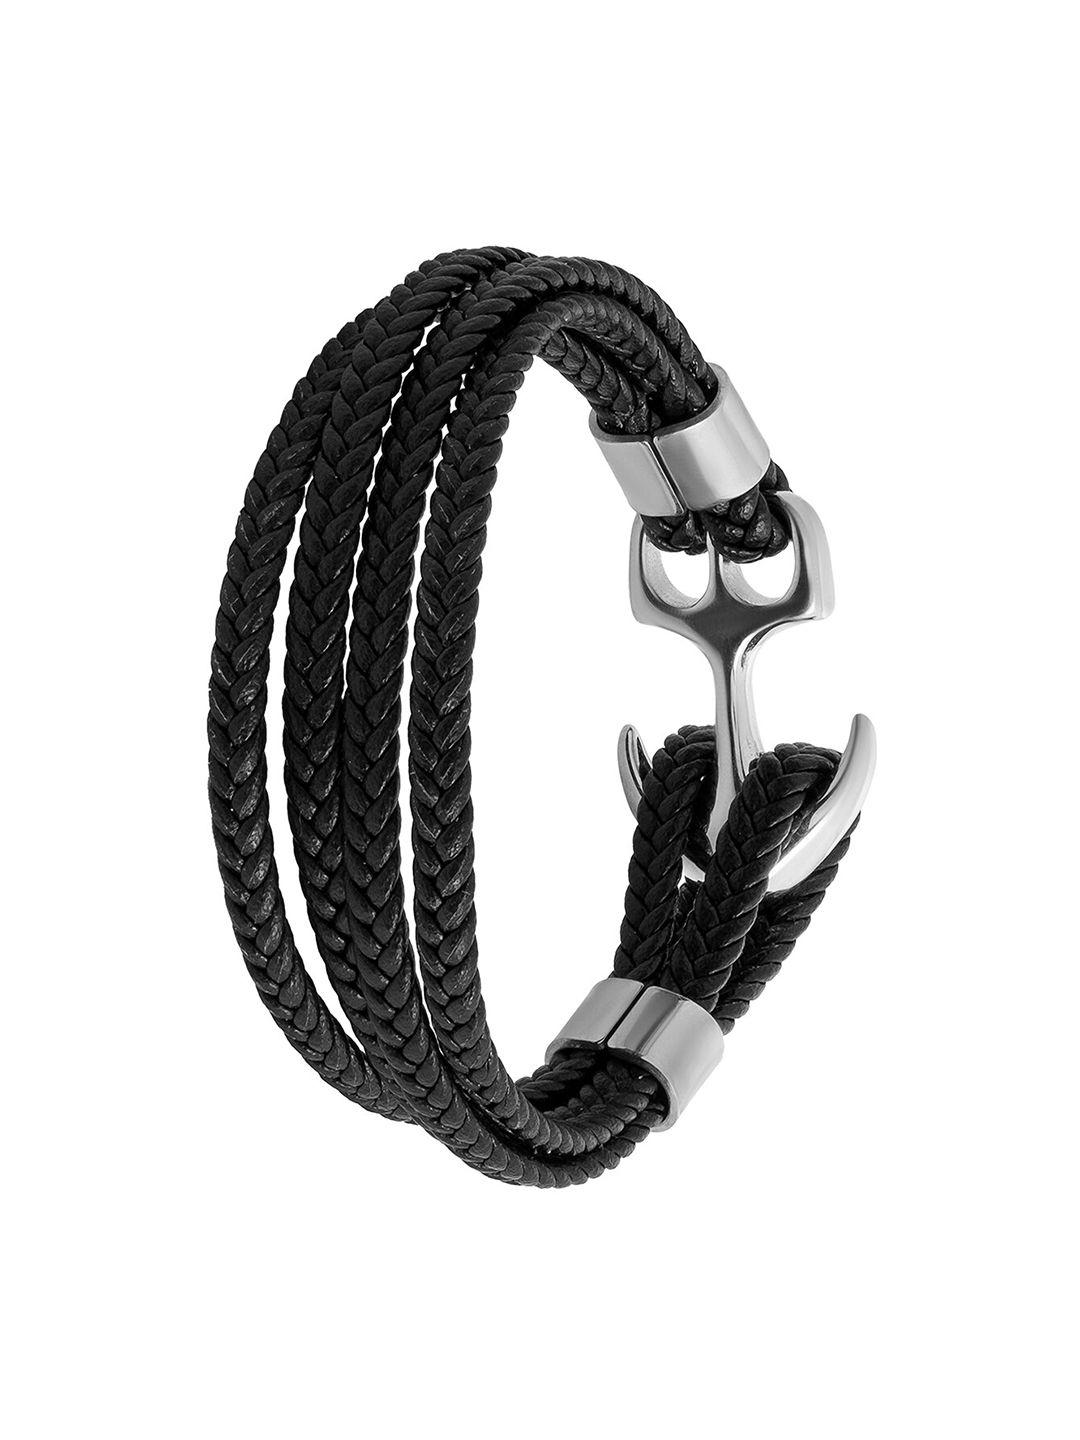 bodha men stainless steel leather silver plated wraparound bracelet